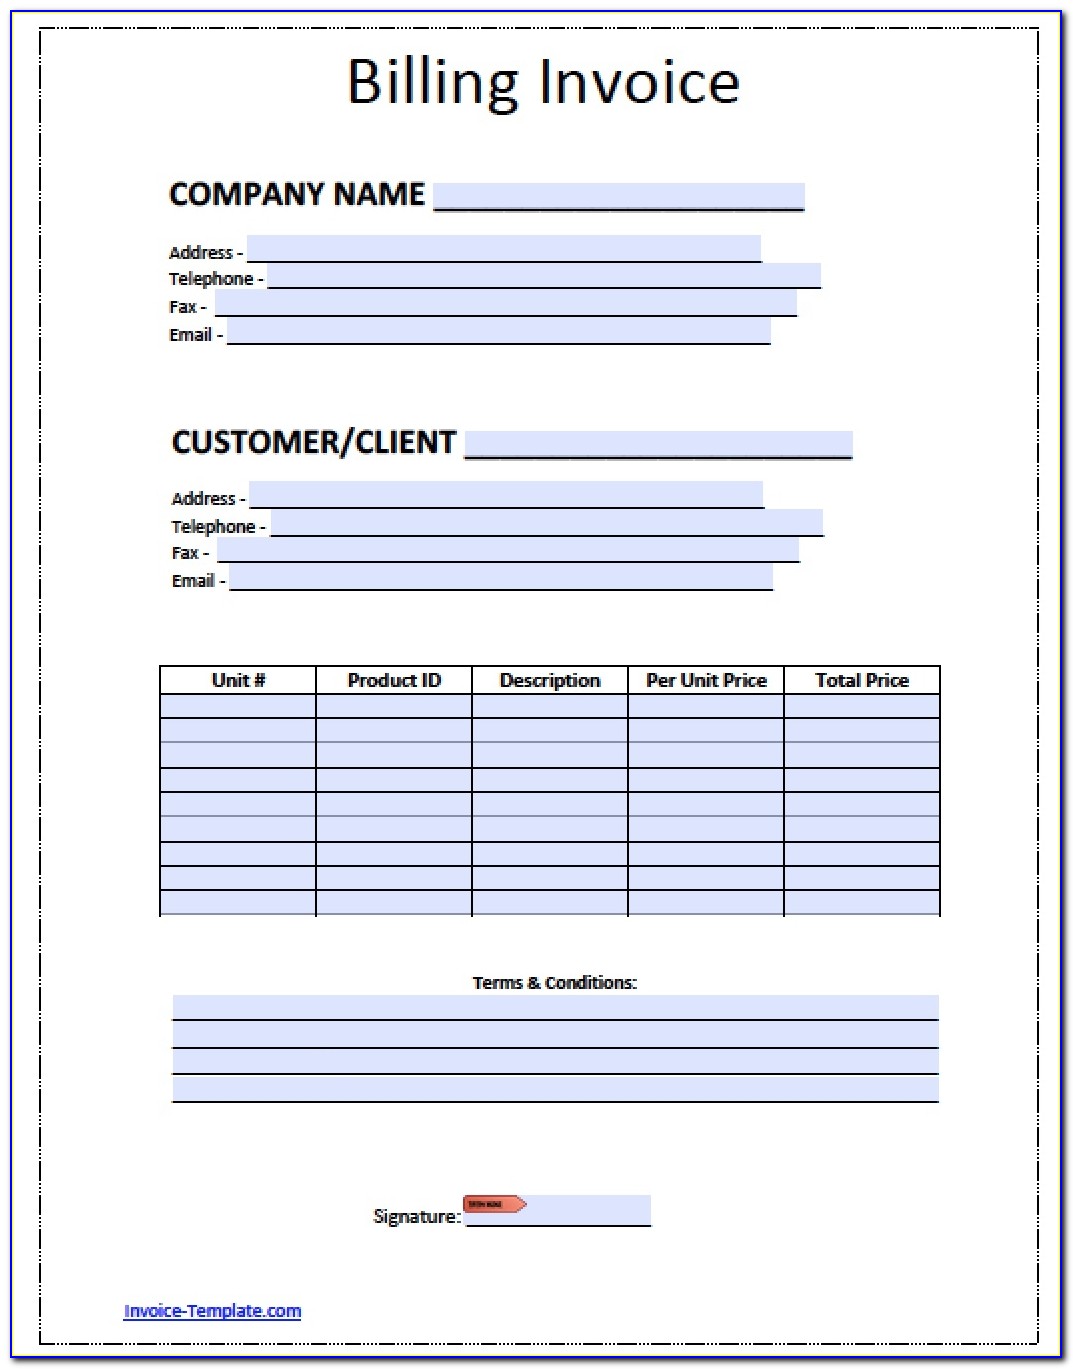 Company Invoice Template Invoice Templat Invoices Free Carbon Carbon Copy Invoice Forms